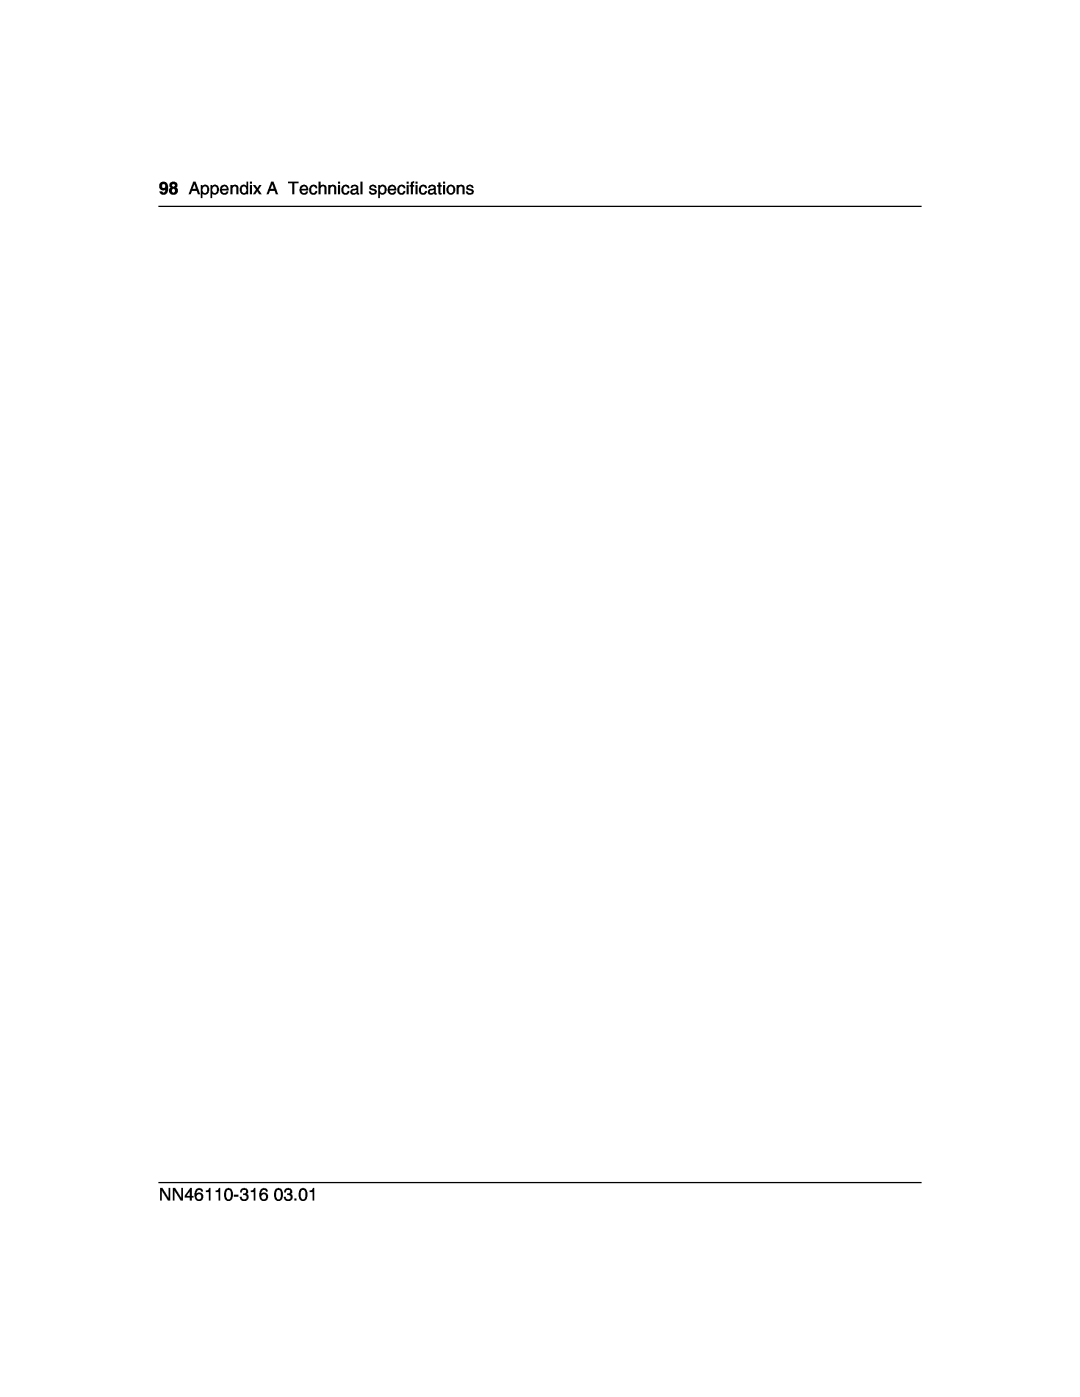 Nortel Networks 1750 manual Appendix A Technical specifications, NN46110-316 